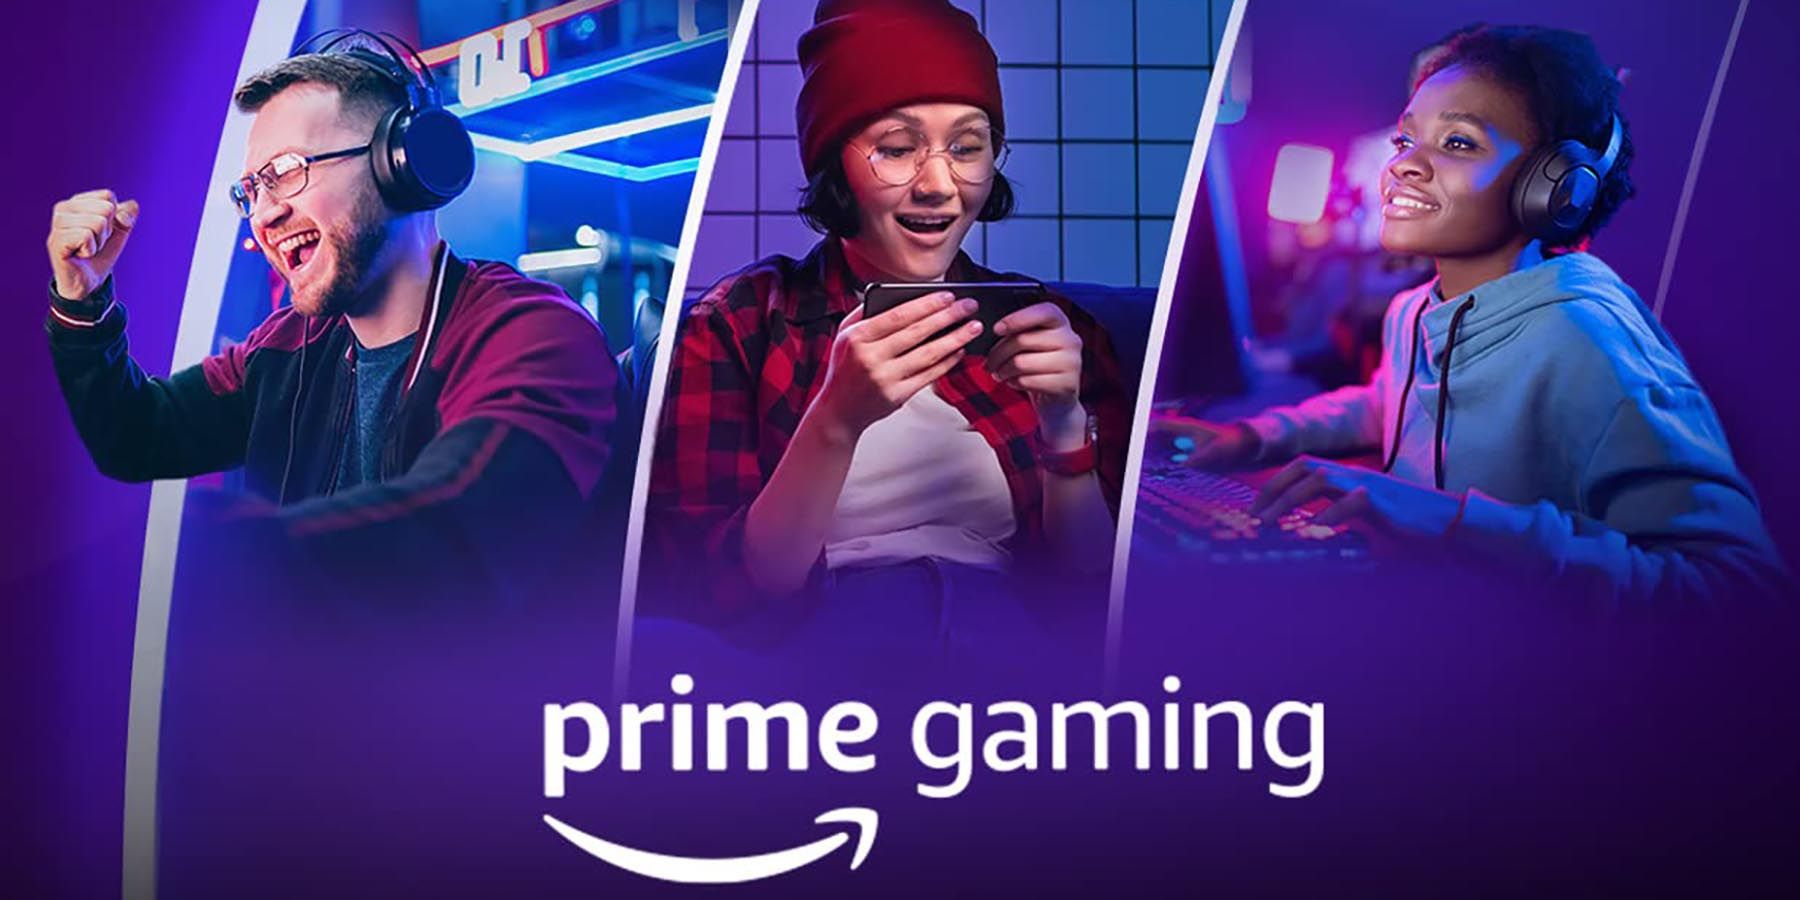 January 2022 Free Games with Prime - Prime Gaming 